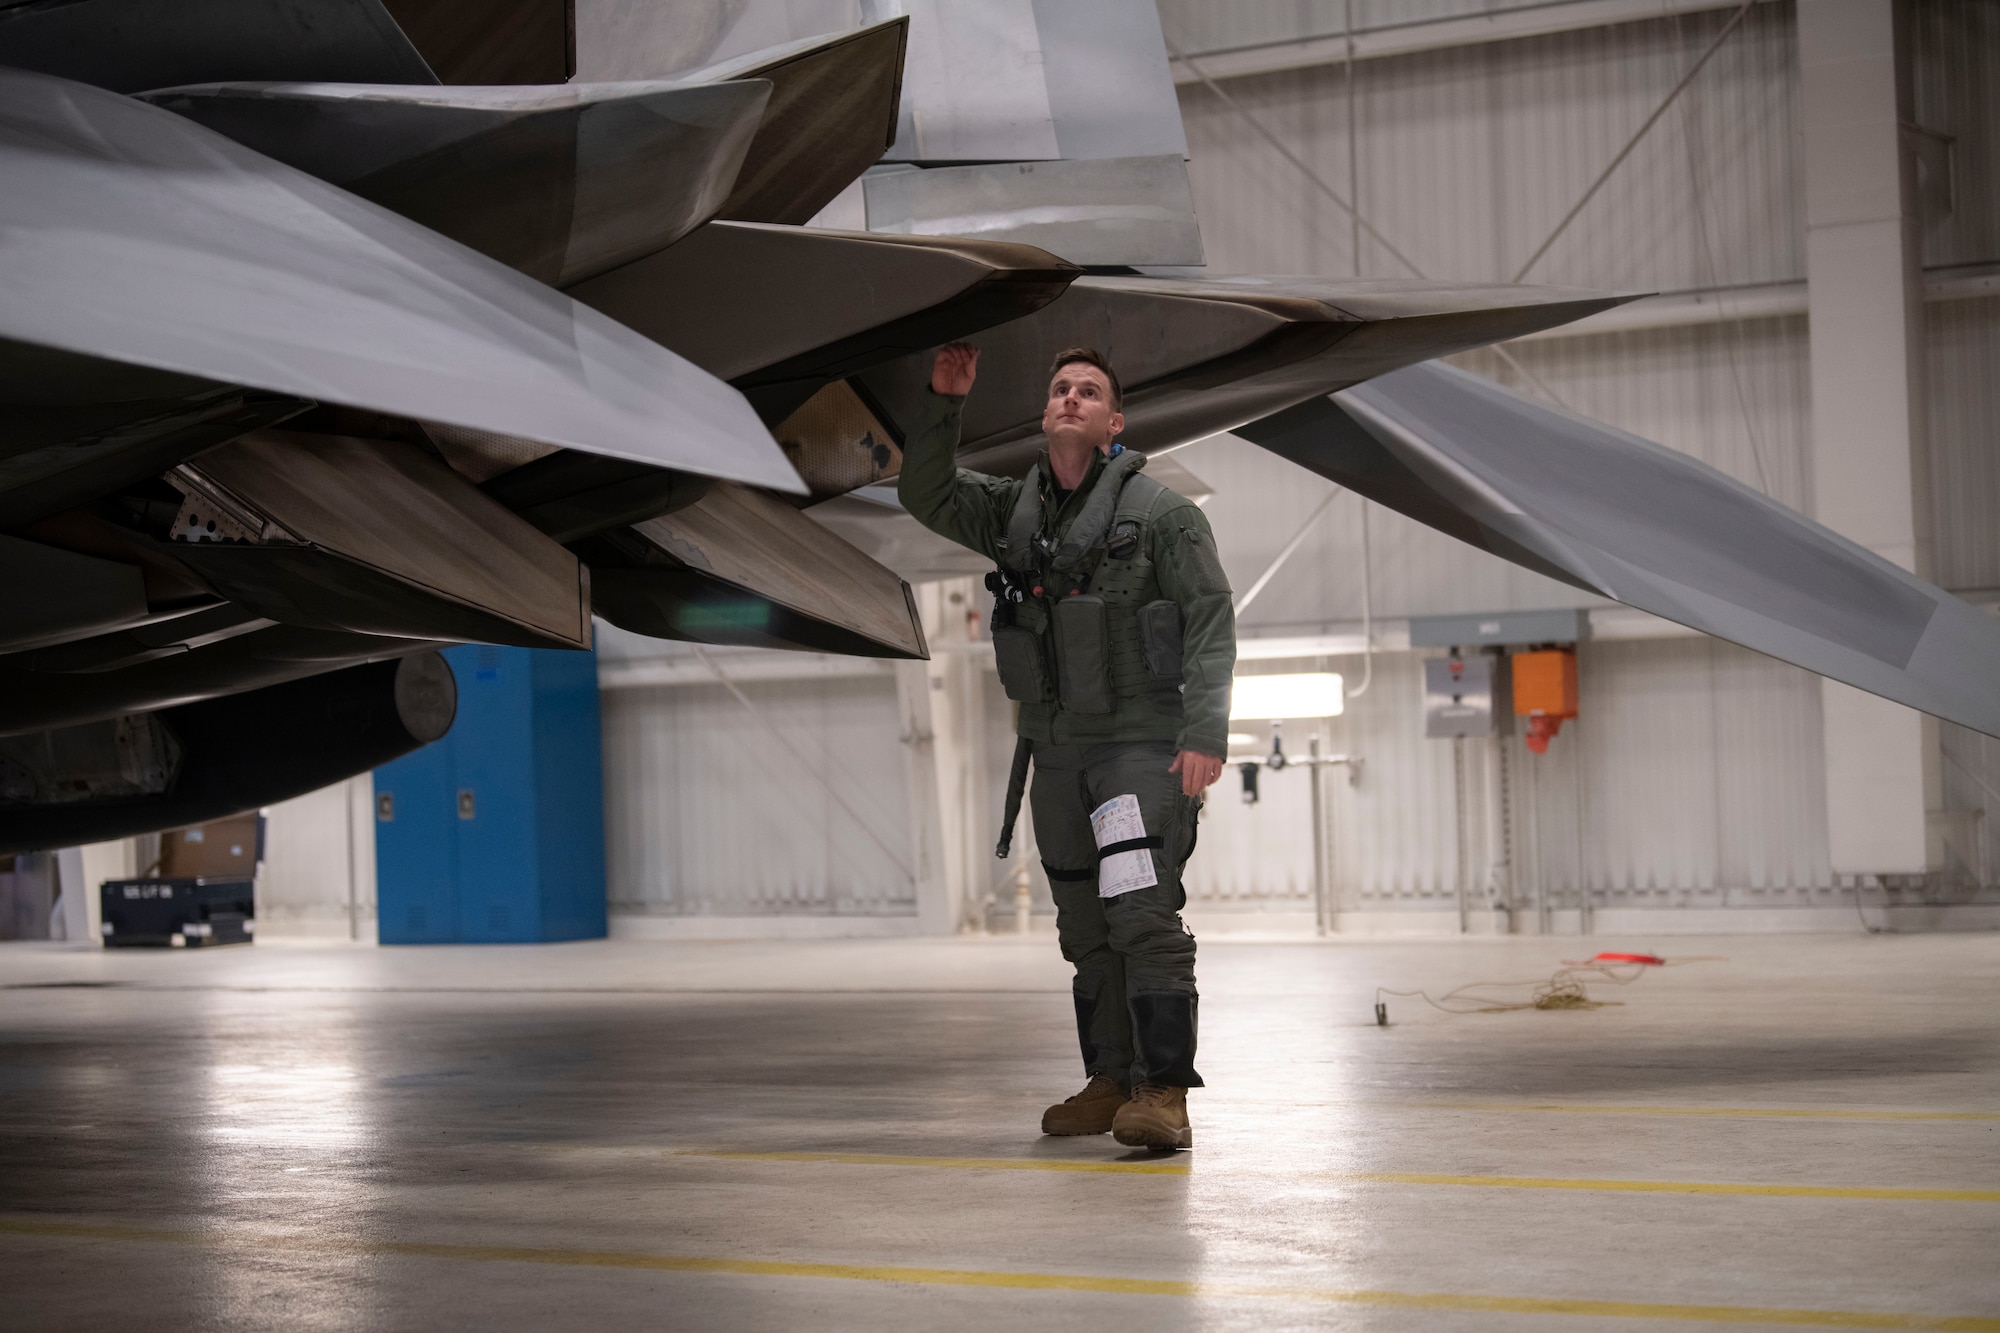 A pilot touches the F-22 aircraft tail